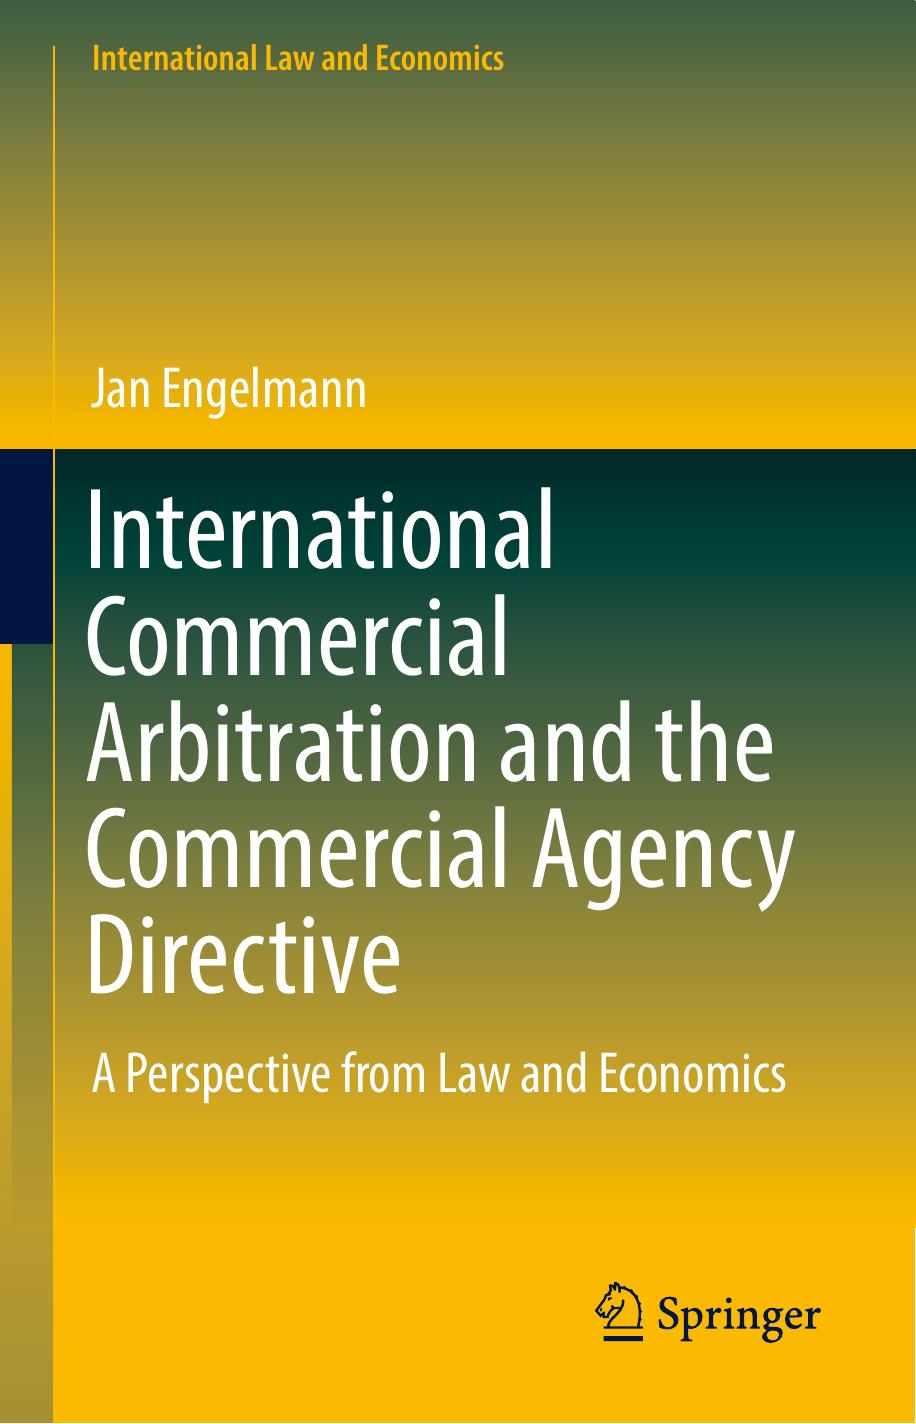 International Commercial Arbitration and the Commercial Agency Directive A Perspective from Law and Economics 2017(1)